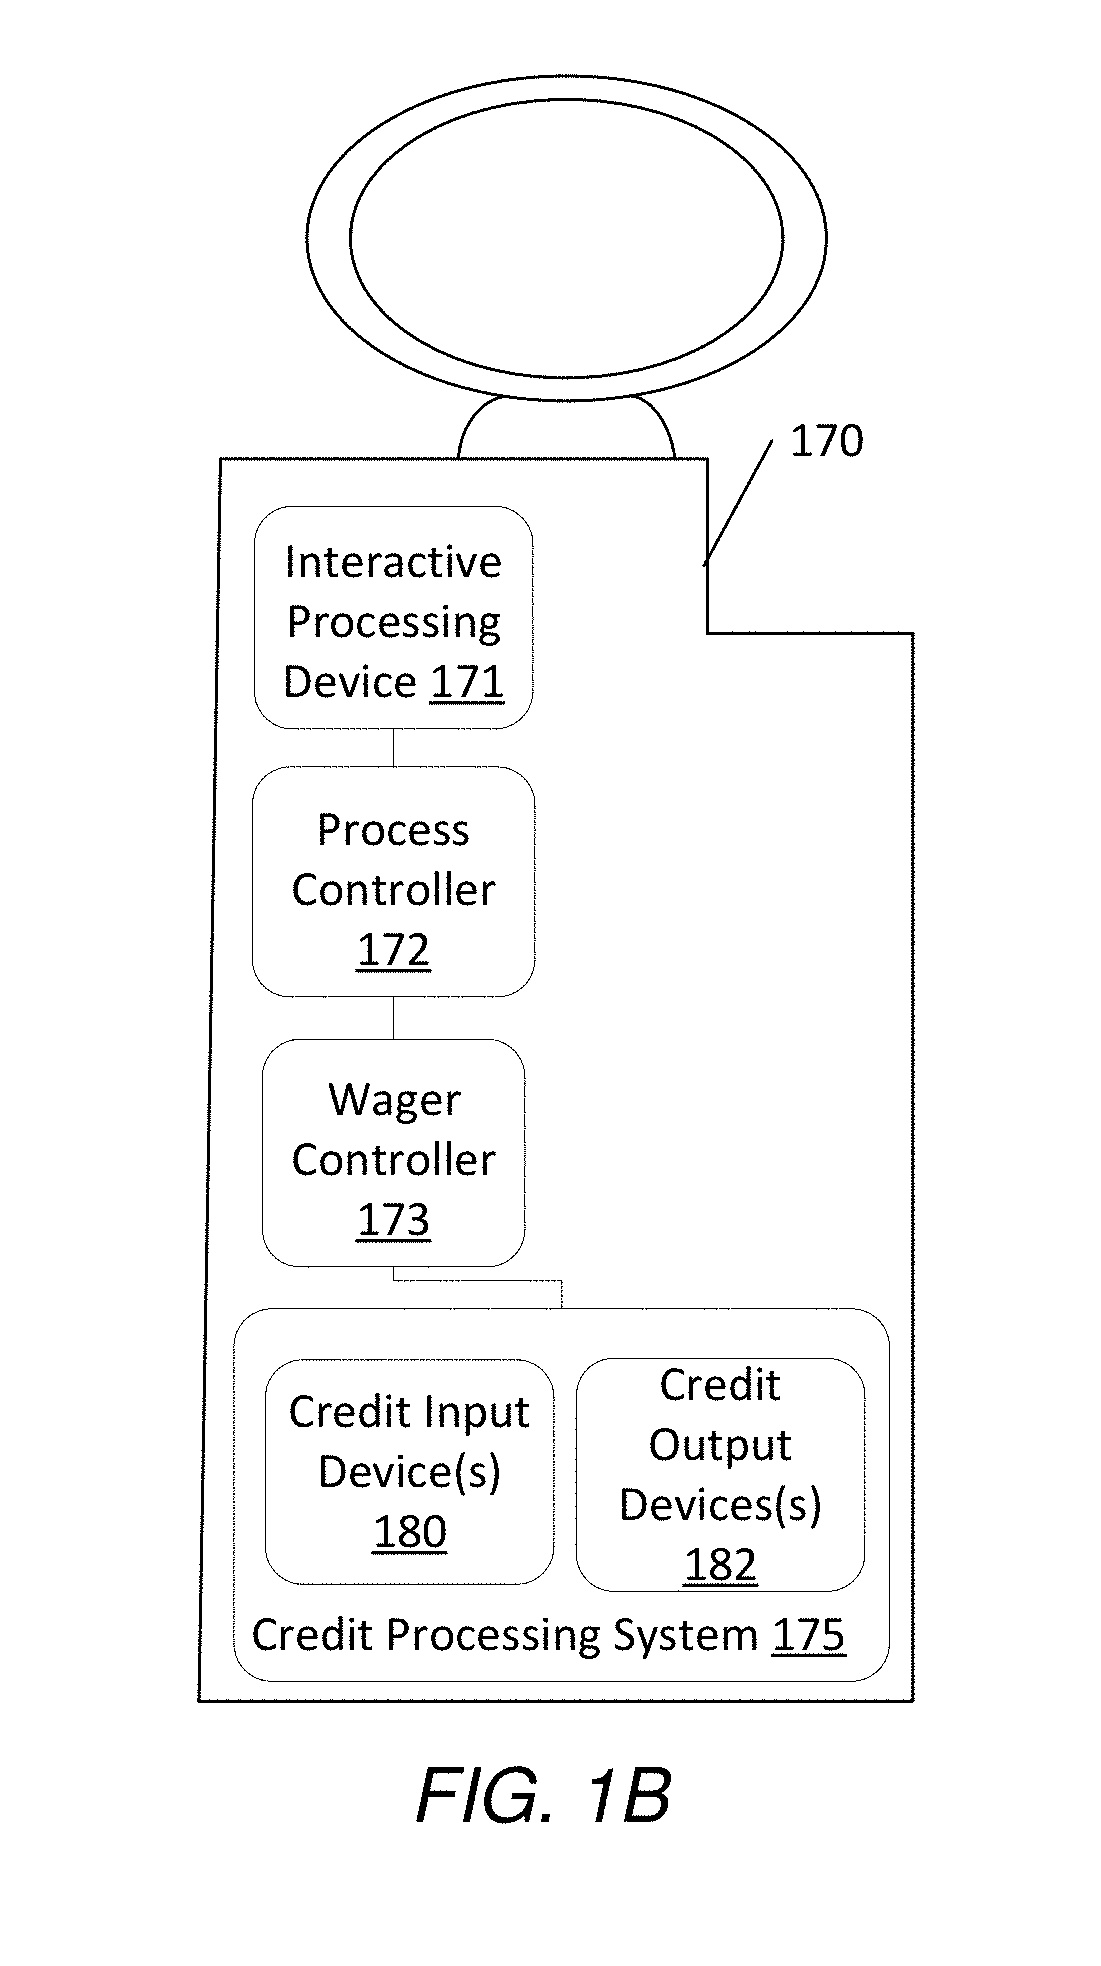 Distributed anonymous payment wagering system